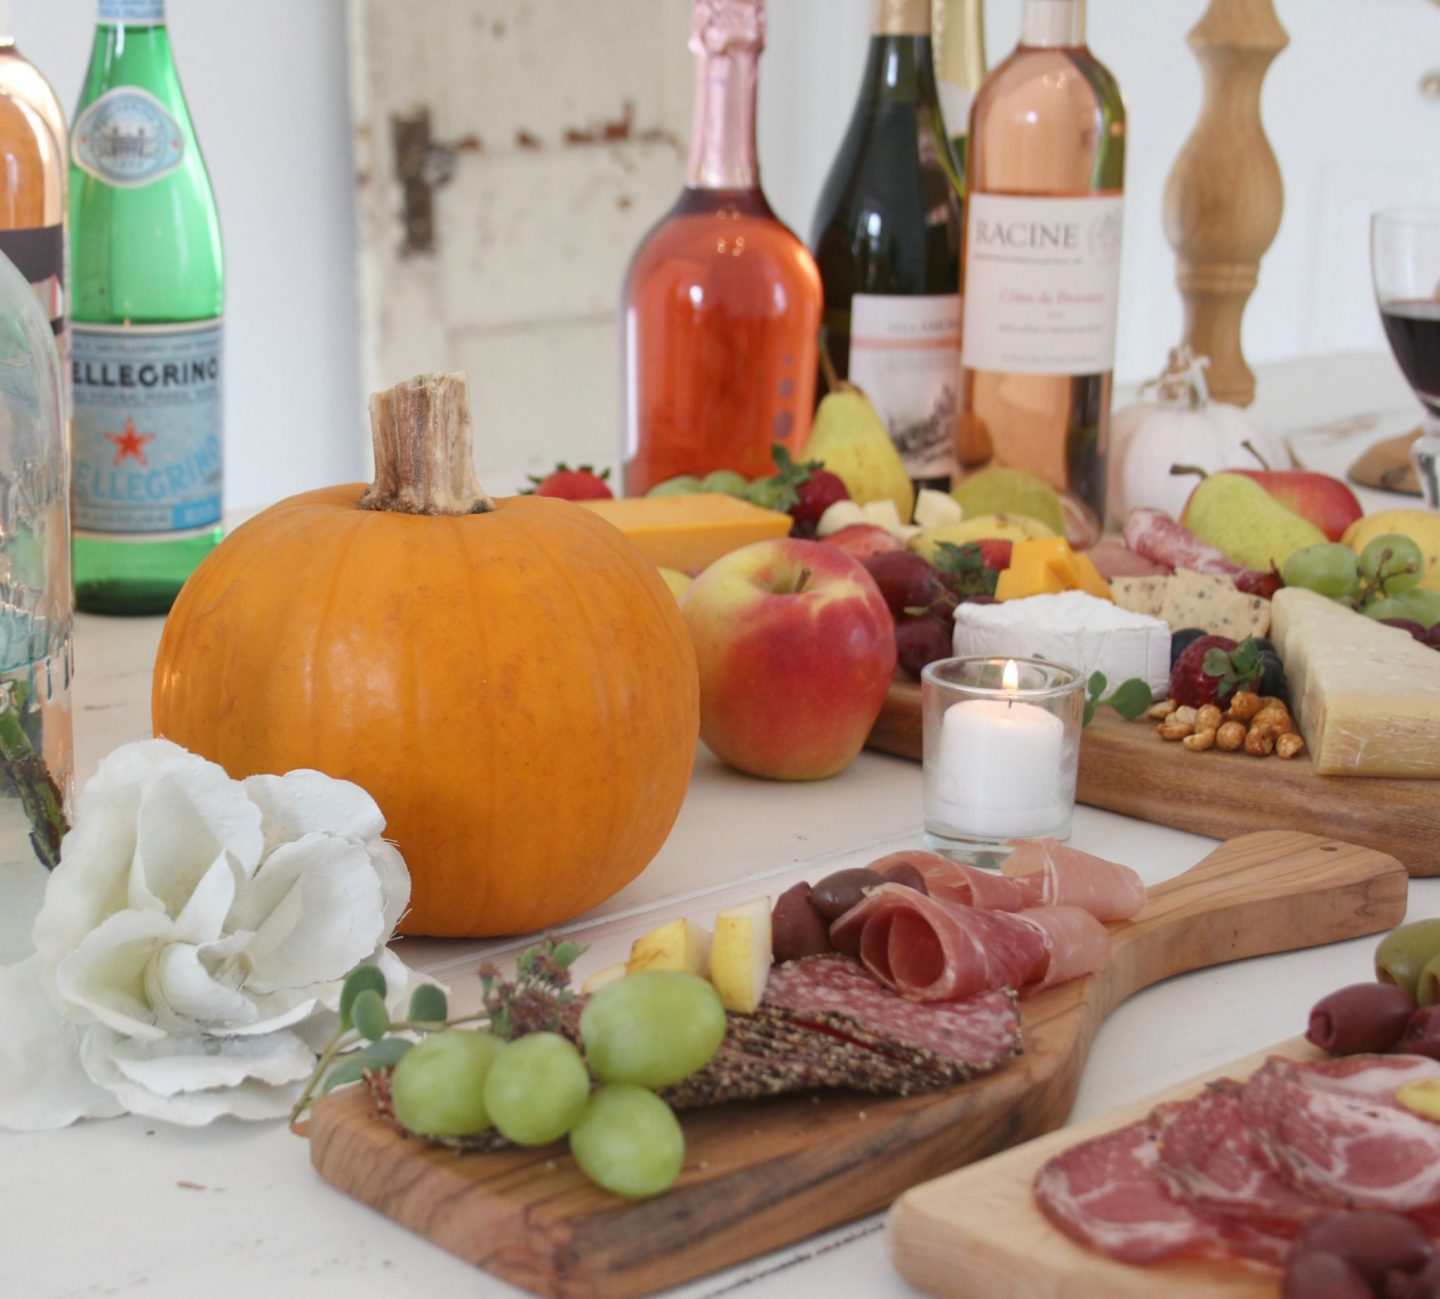 Vibrant and colorful, these cheeseboards with charcuterie and farmers market freshness are perfect for simple entertaining and an elegant tablescape. Serve with your favorite wine! Hello Lovely Studio. #grazeboard